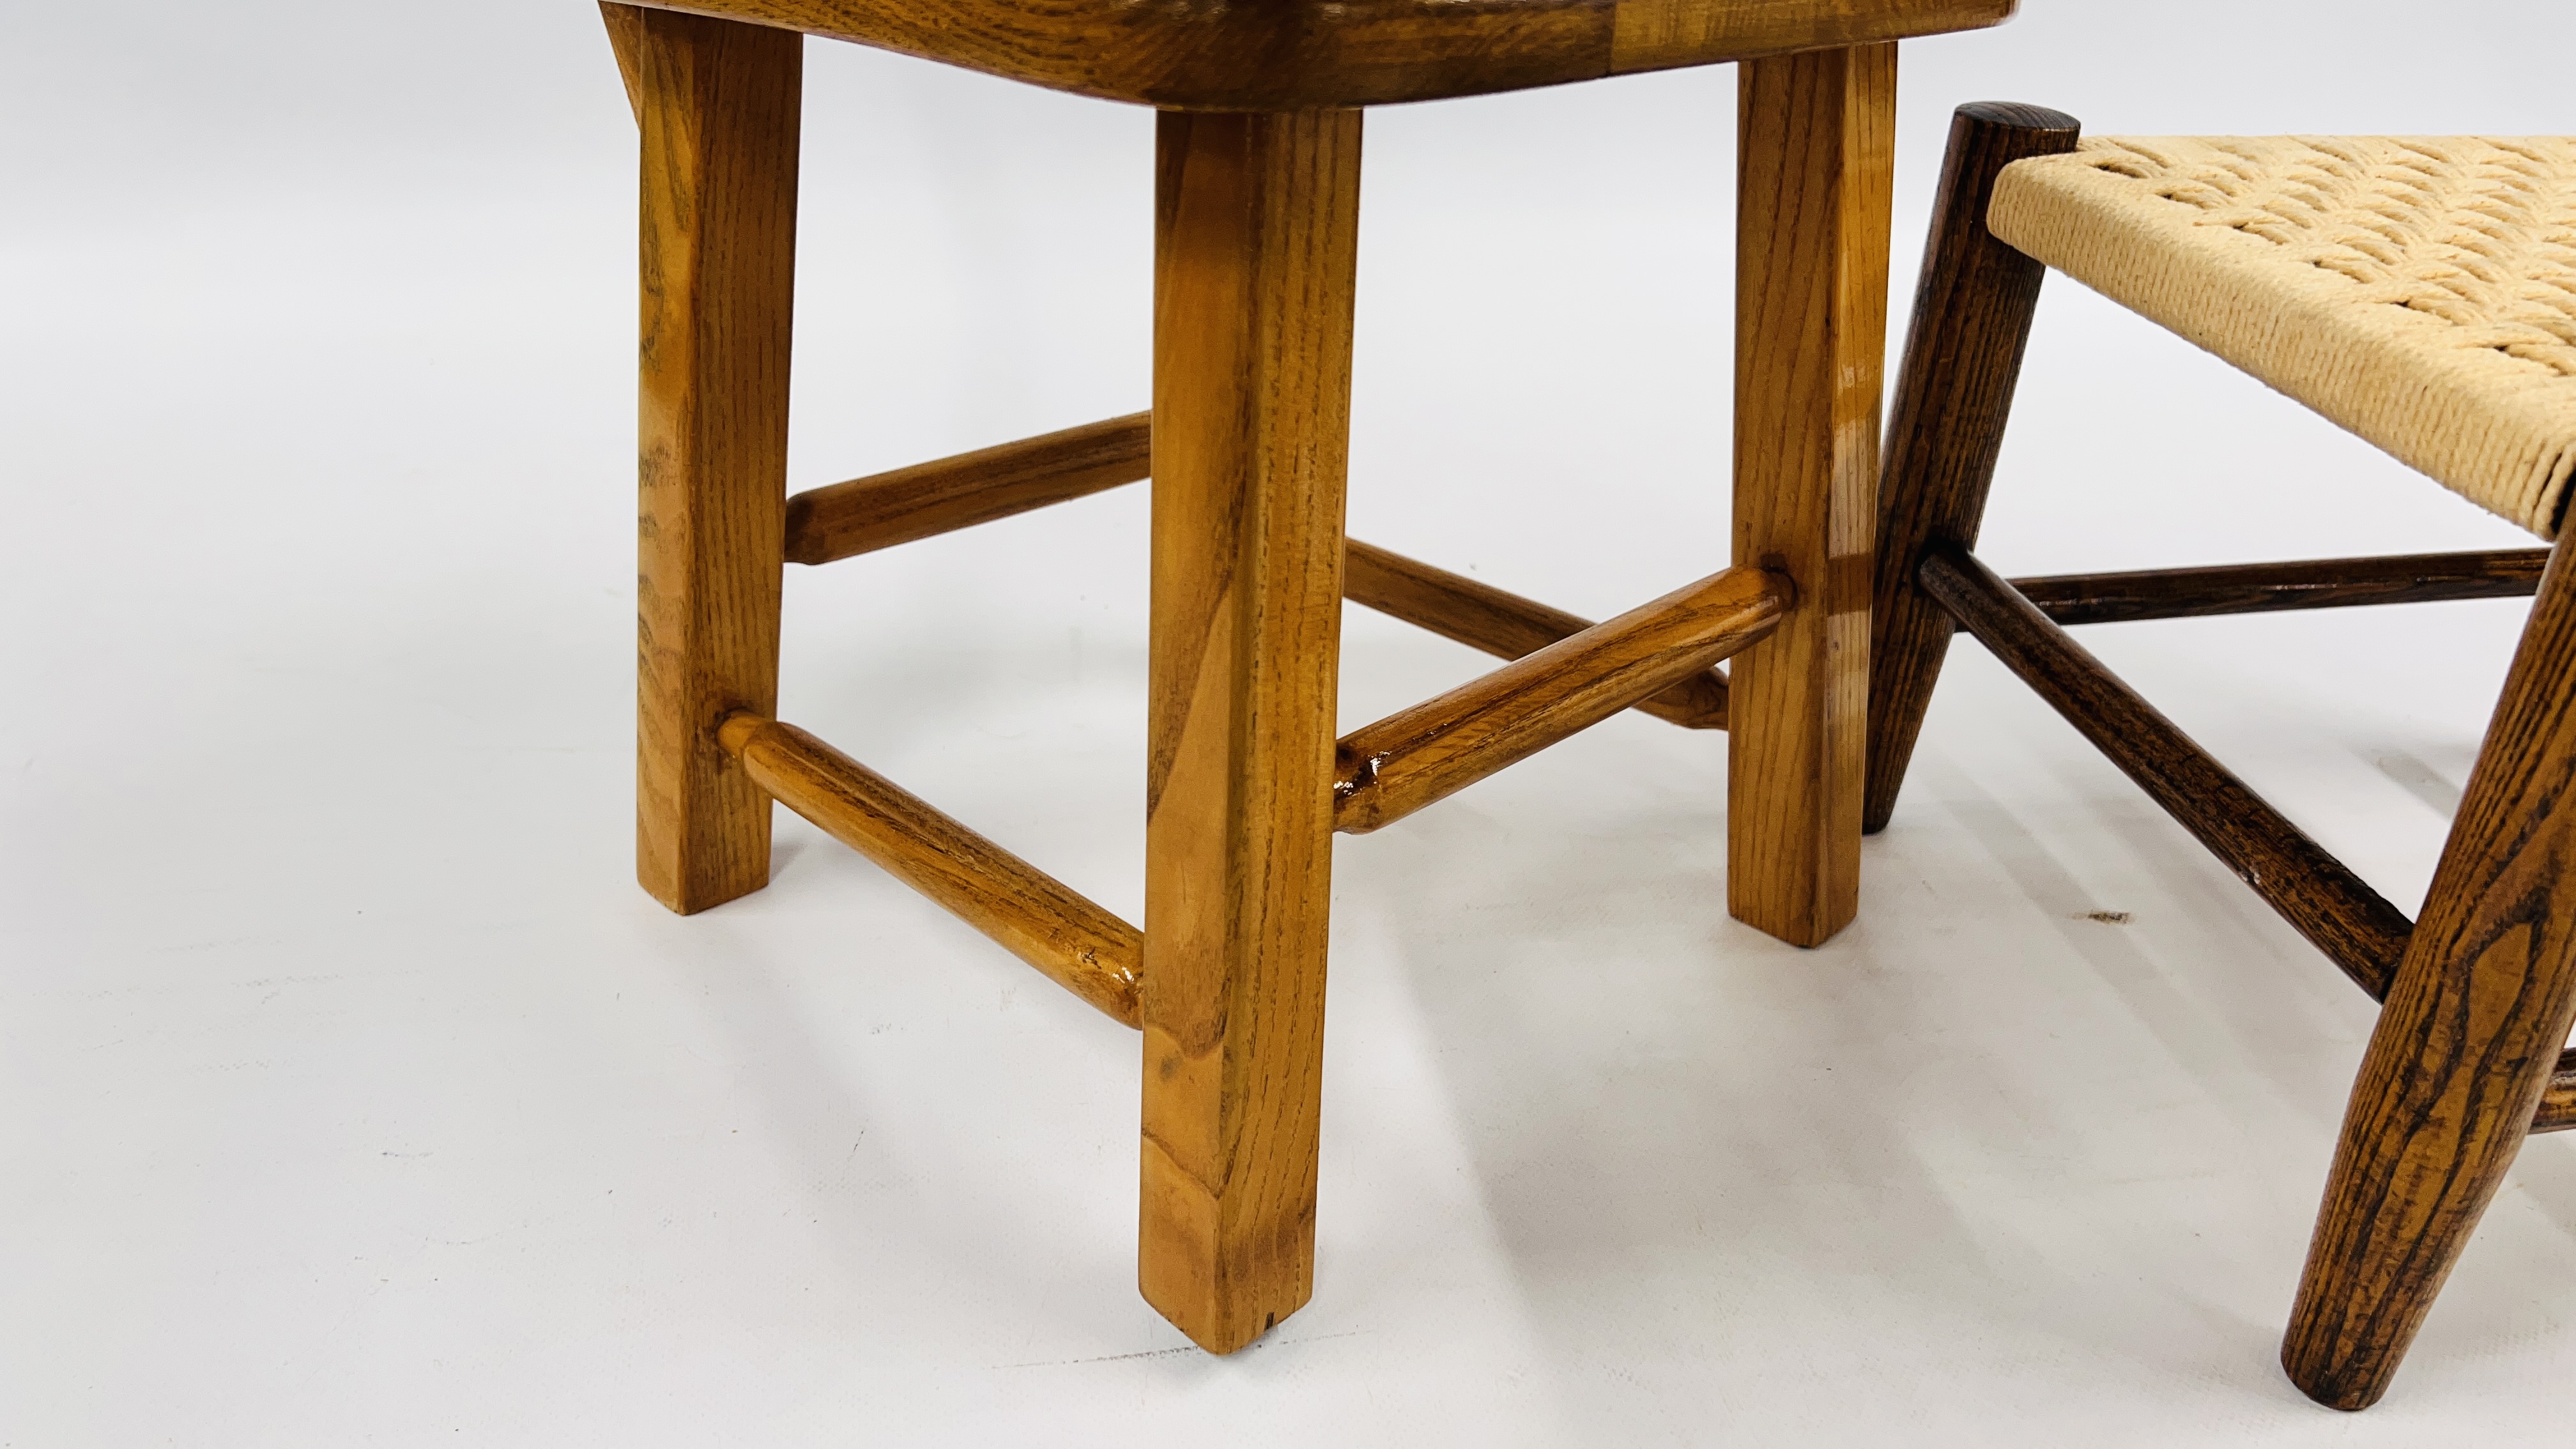 A HANDMADE SOLID OAK CHILD'S CHAIR AND SMALL OAK STOOL WITH WOVEN SEAT. - Image 5 of 9